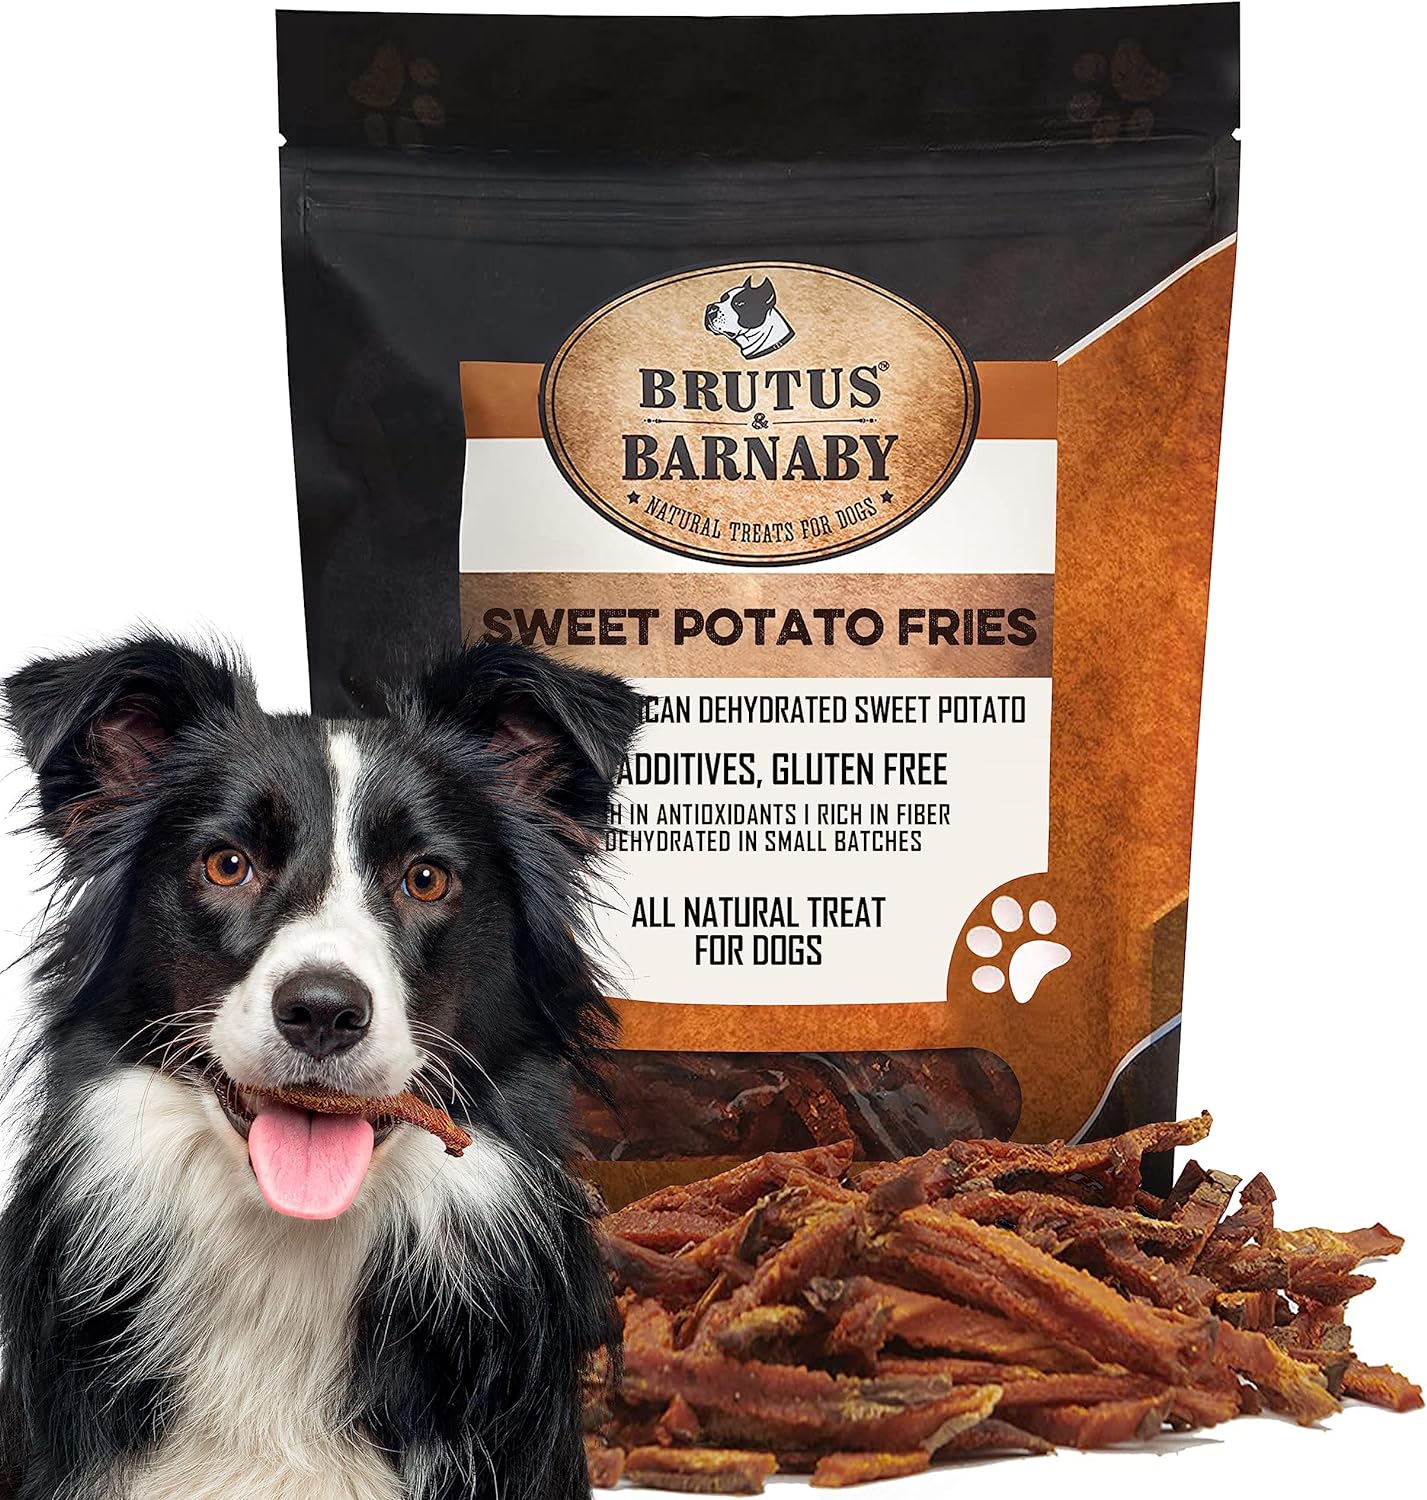 BRUTUS & BARNABY Sweet Potato Dog Treats- No Additive Dehydrated Sweet Potato Fries, Grain Free, Gluten Free and No Preservatives Added (5lb)